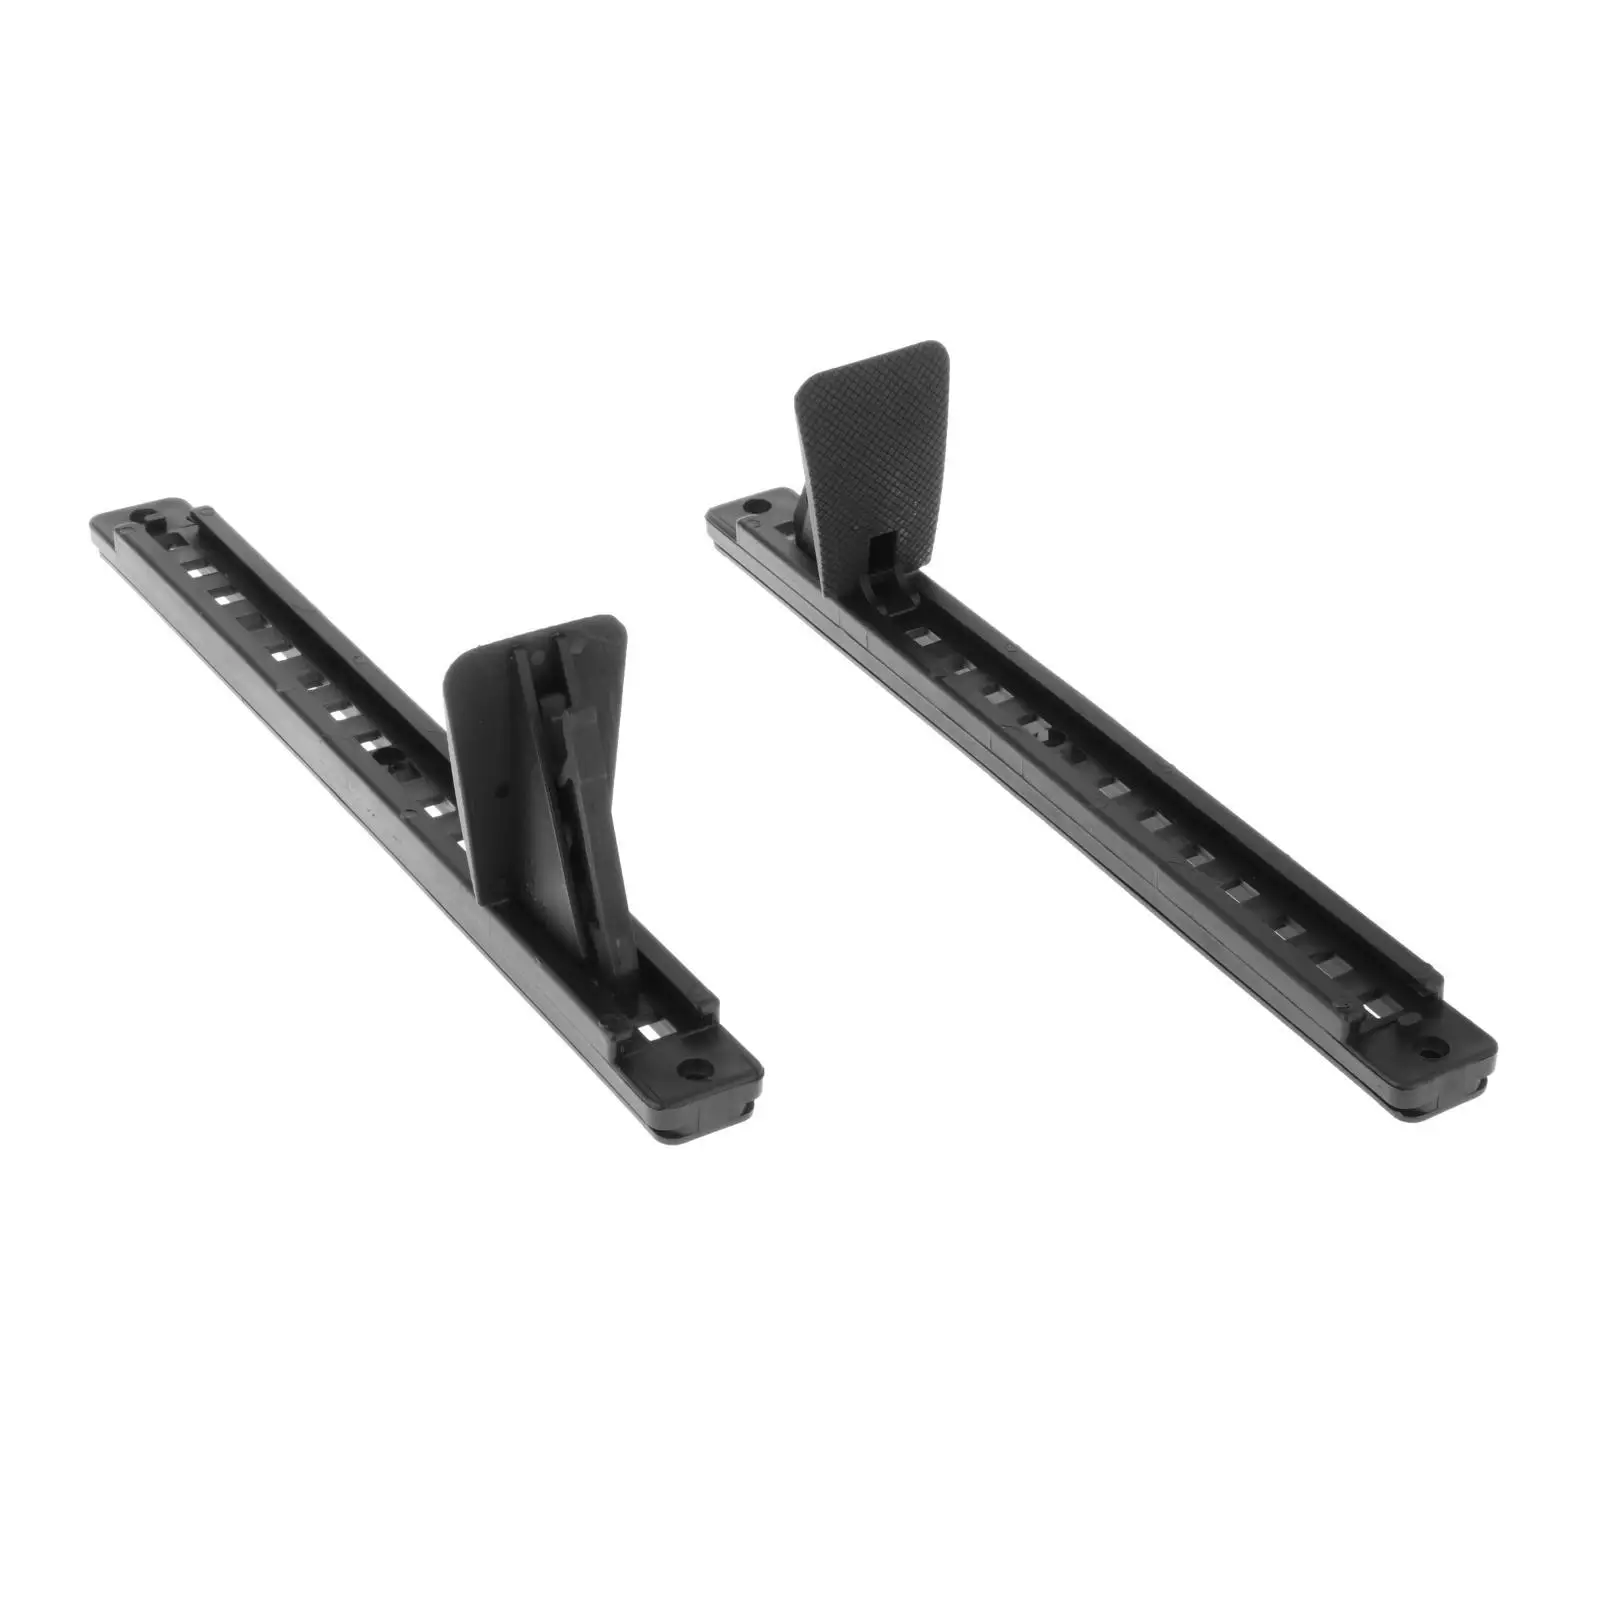 Kayak Foot Pegs Replacement Parts Black Adjustable Easy to Install Foot Rest